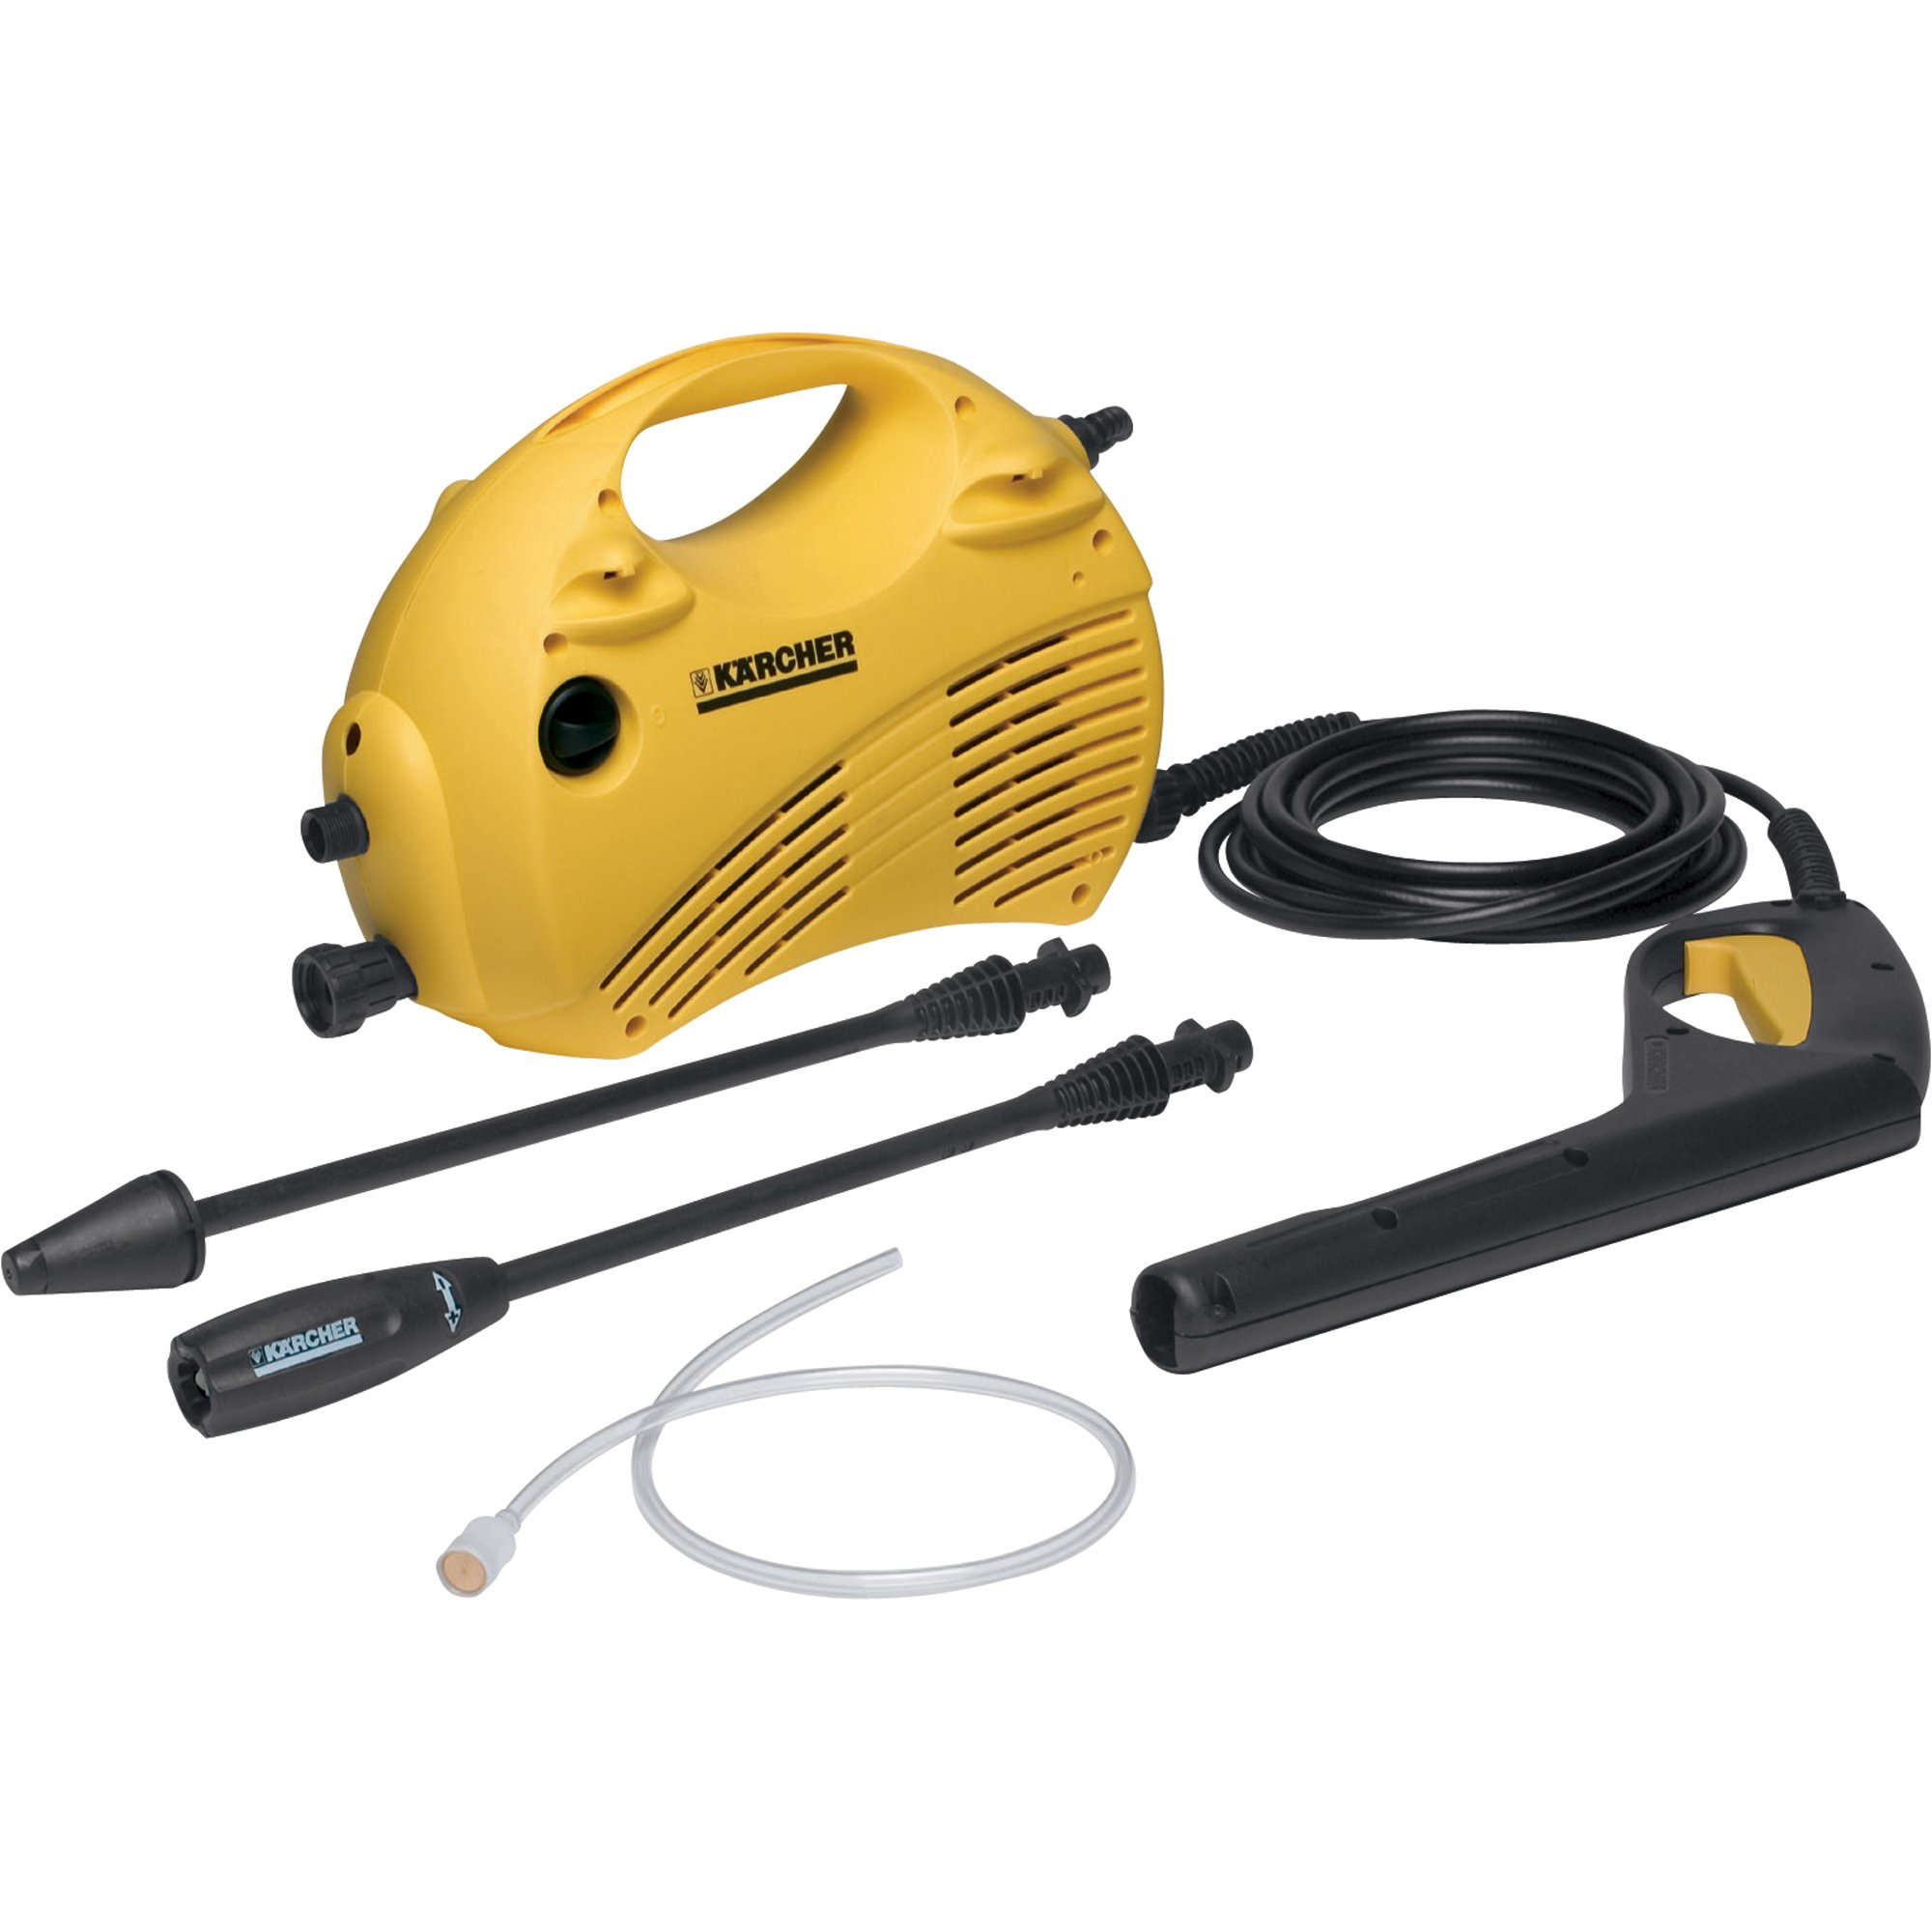 Karcher 1800 PSI (Electric - Cold Water) Pressure Washer